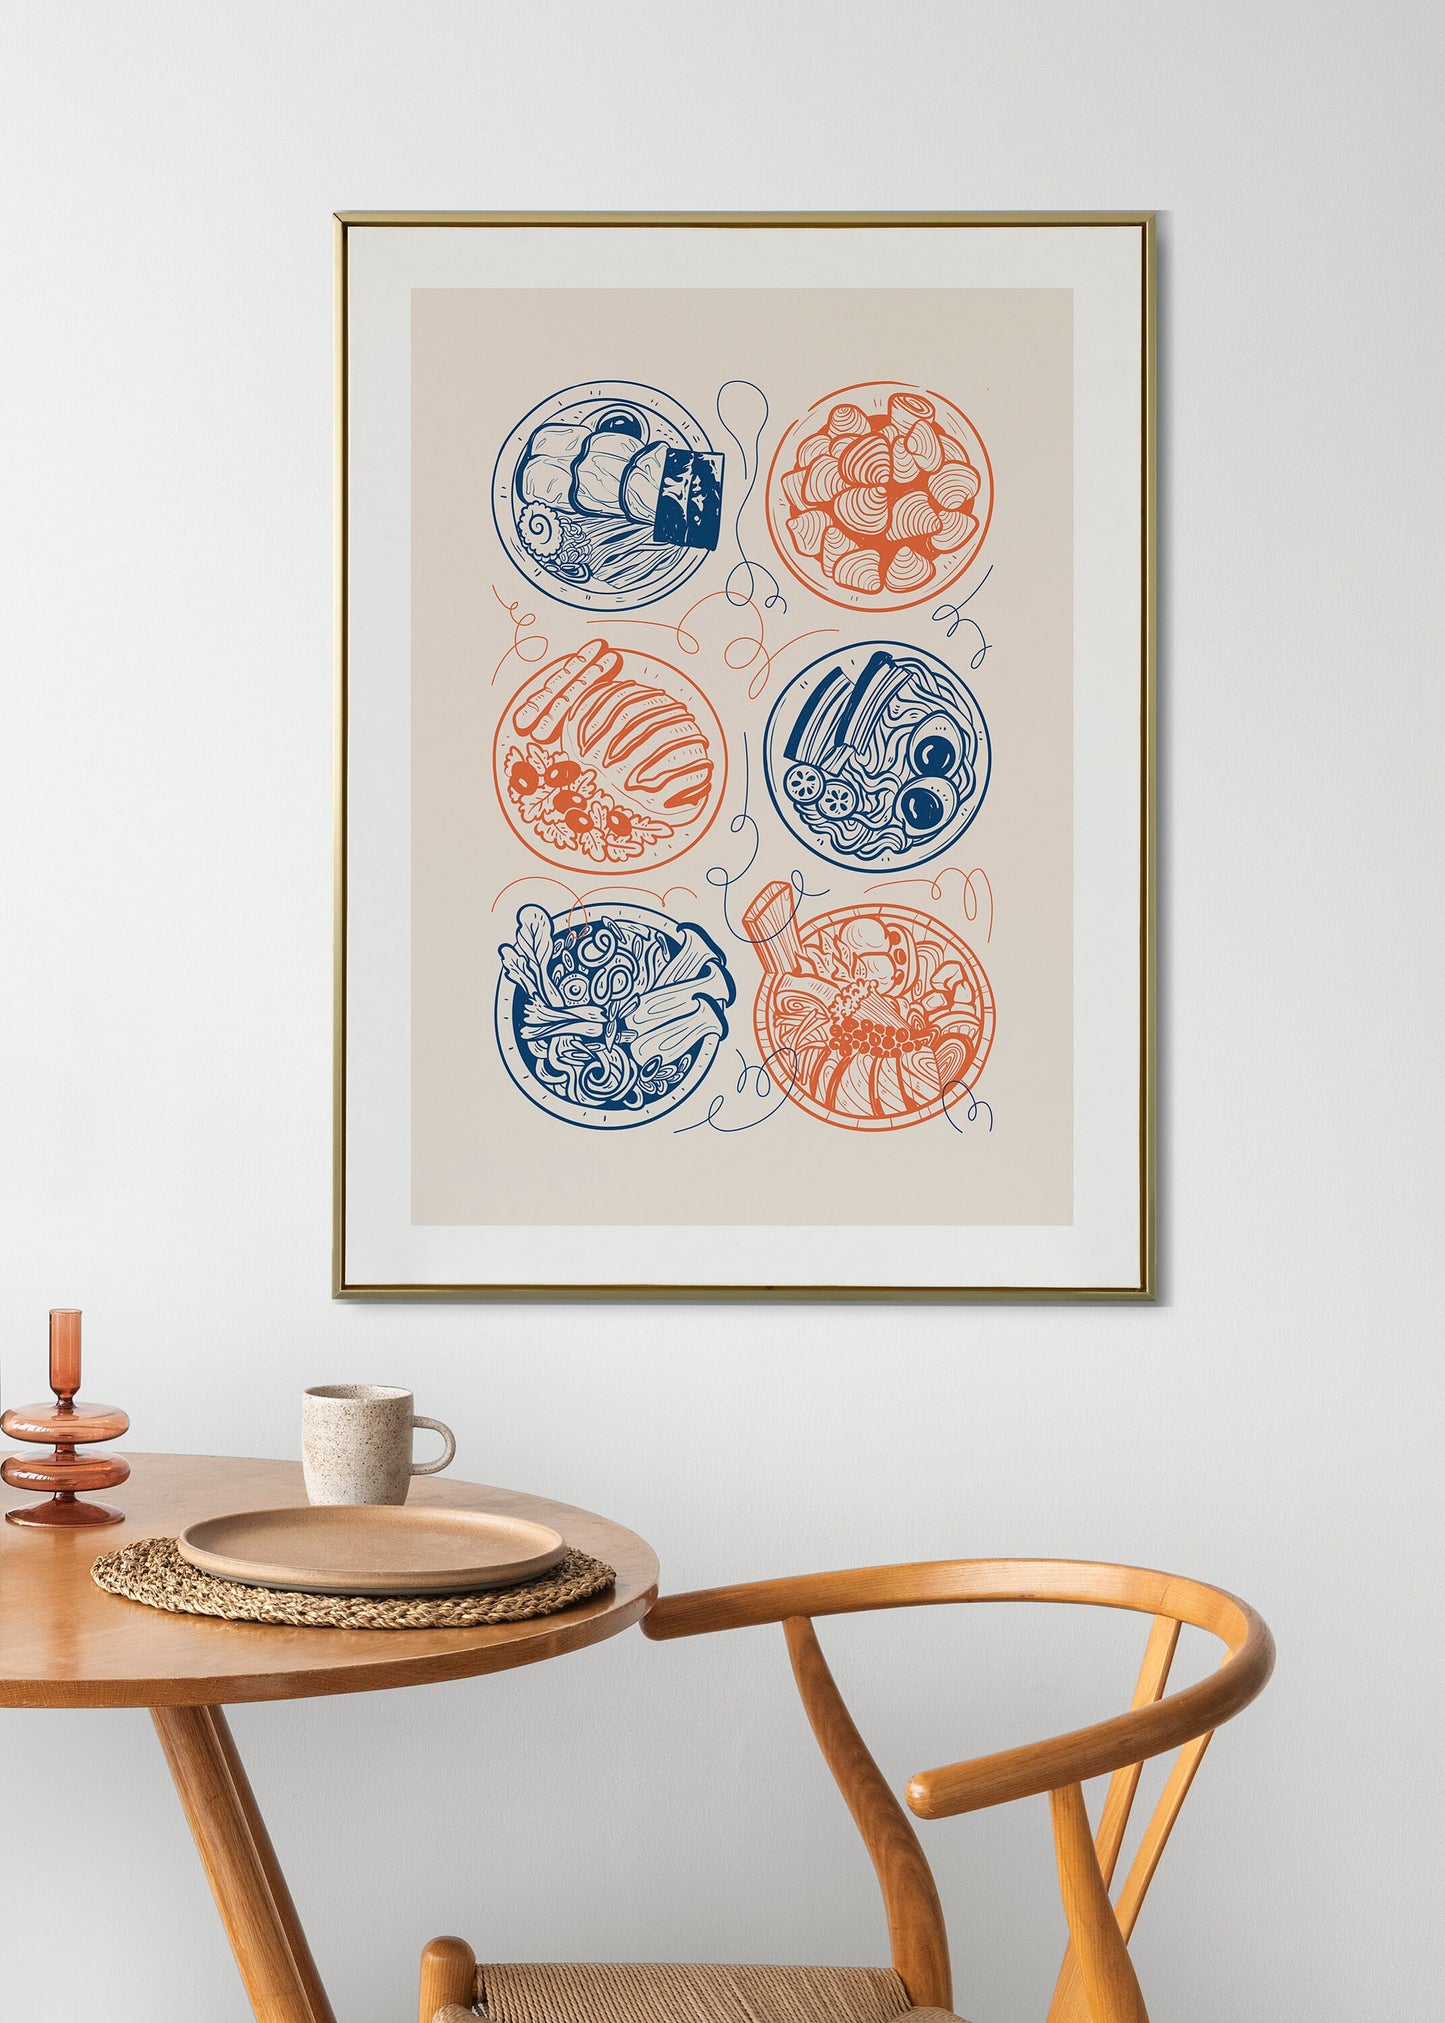 Japanese Food Wall Art, Abstract Style, Japanese Food Illustrations, Kitchen Art, Dining Room Decor, Kitchen Prints, A5/A4/A3/A2, Japanese